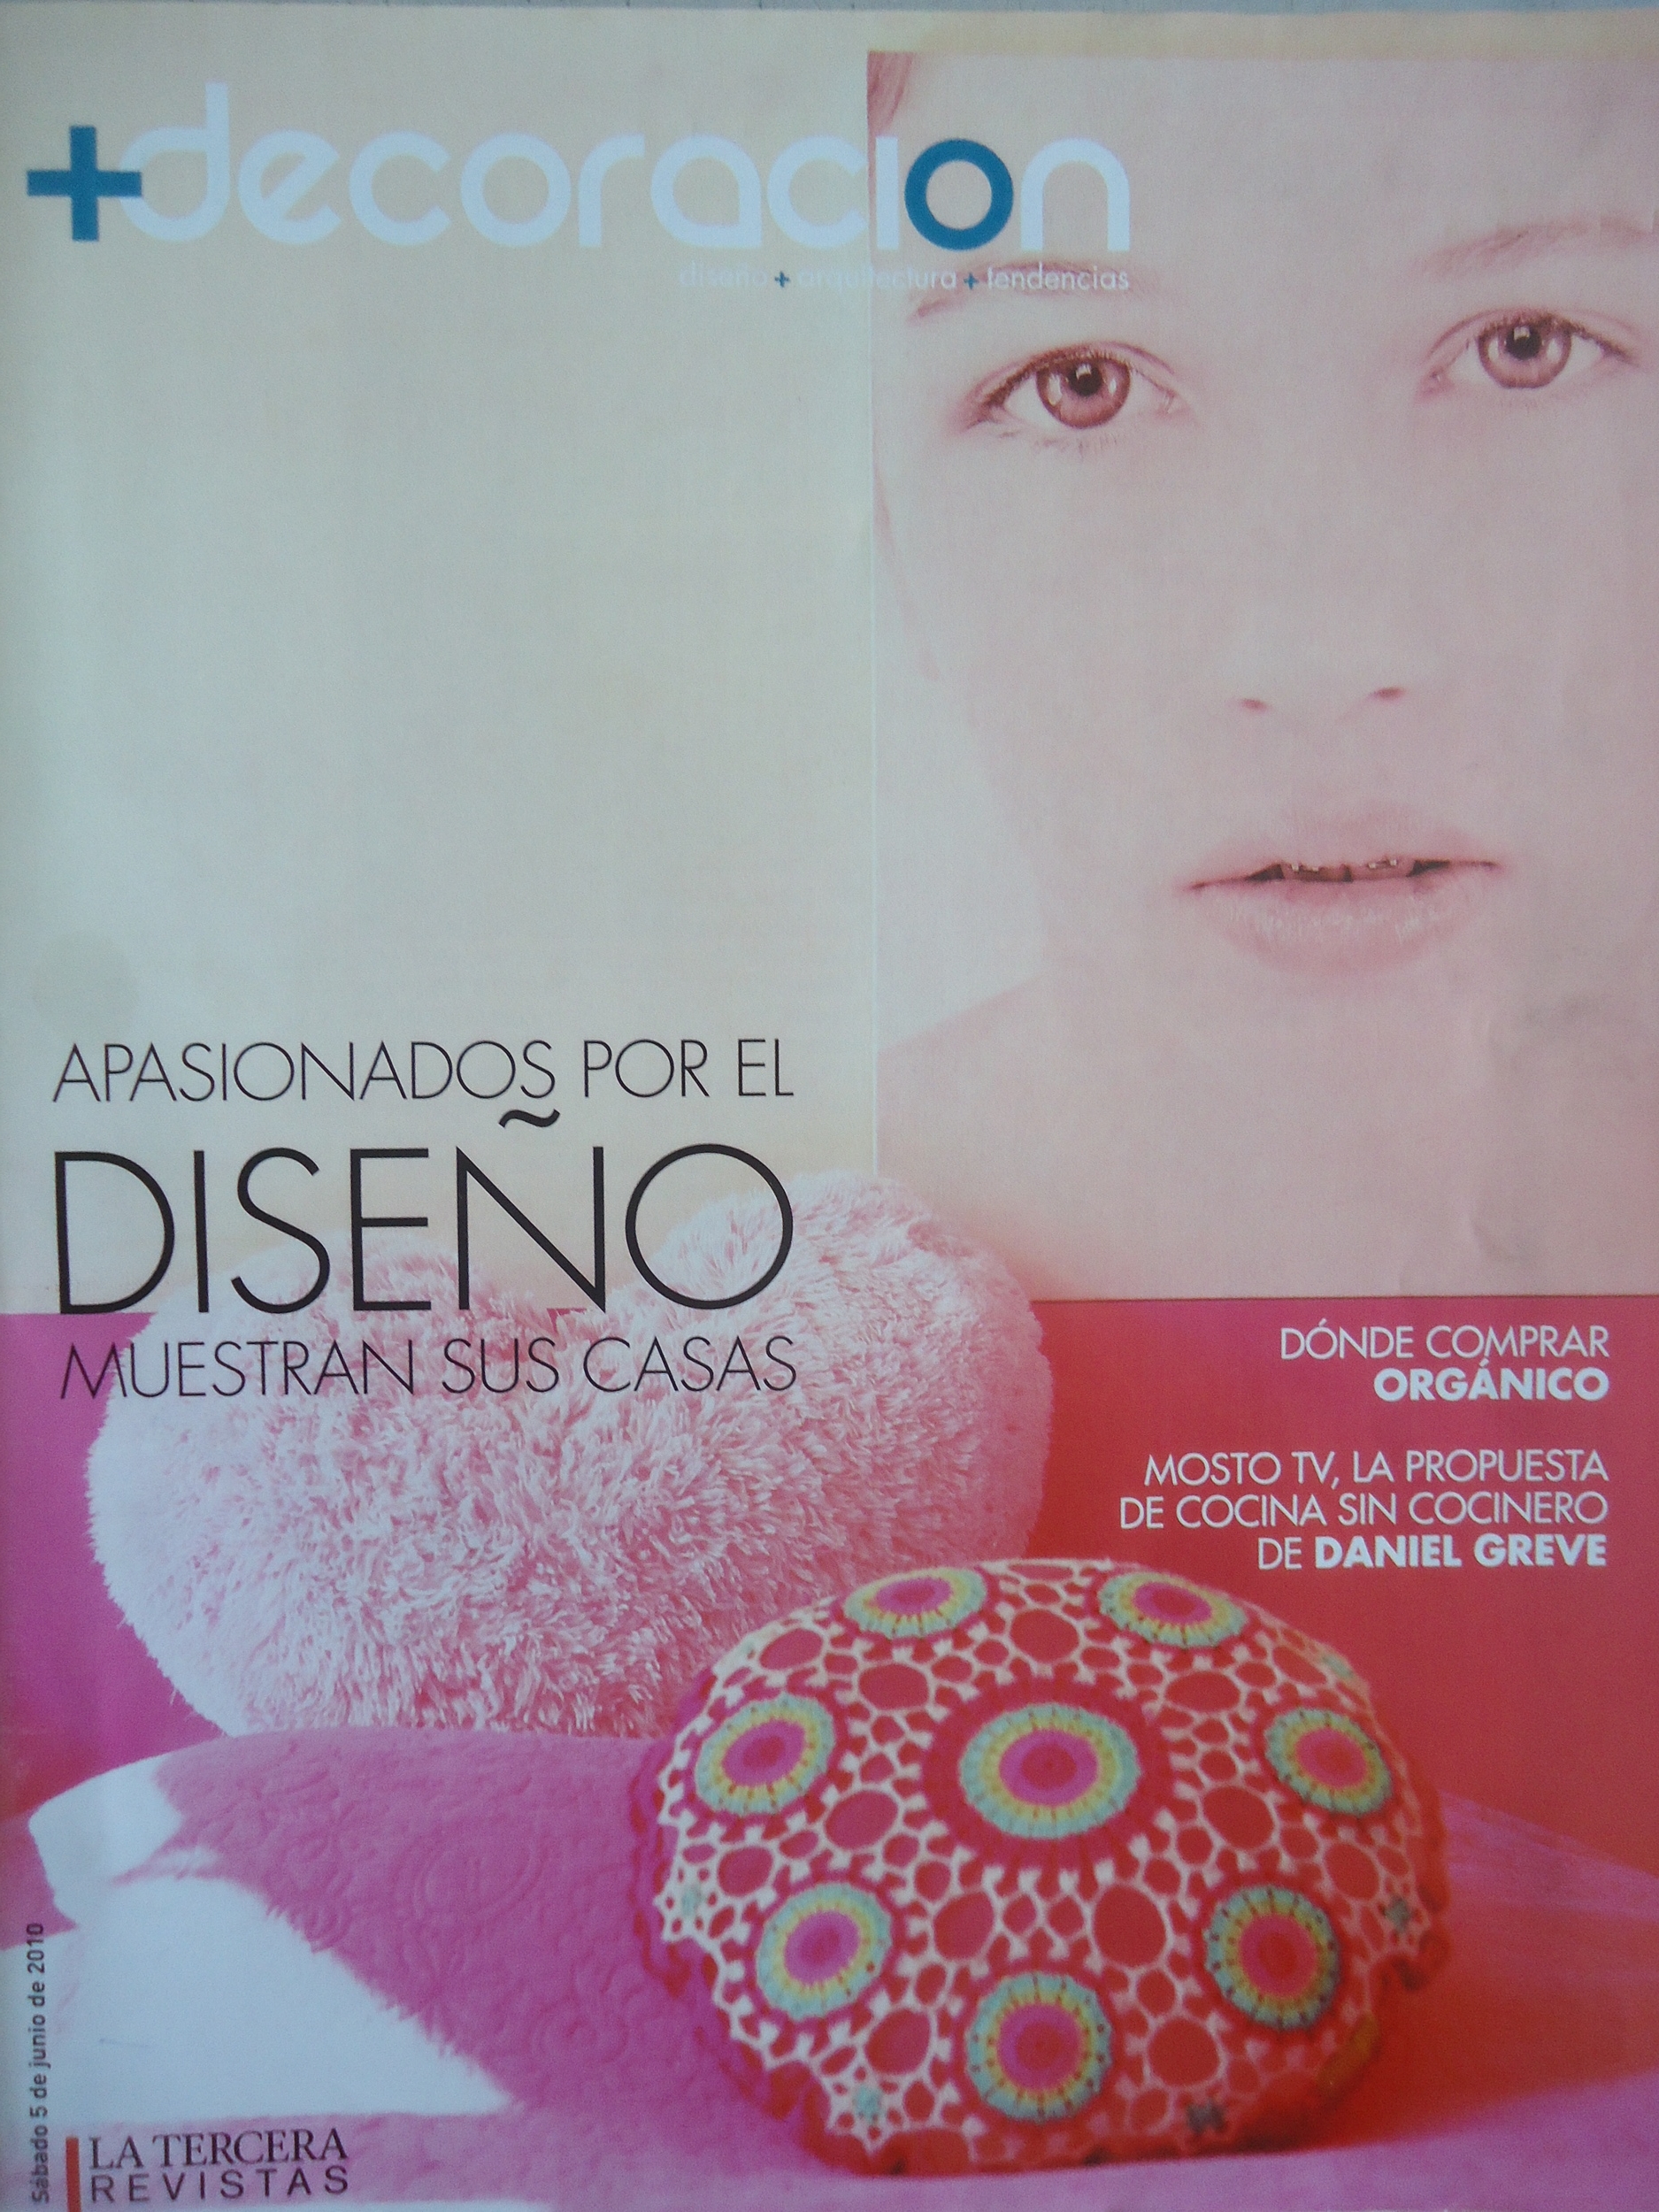 Micky Hurley - Article in Diseno magazine